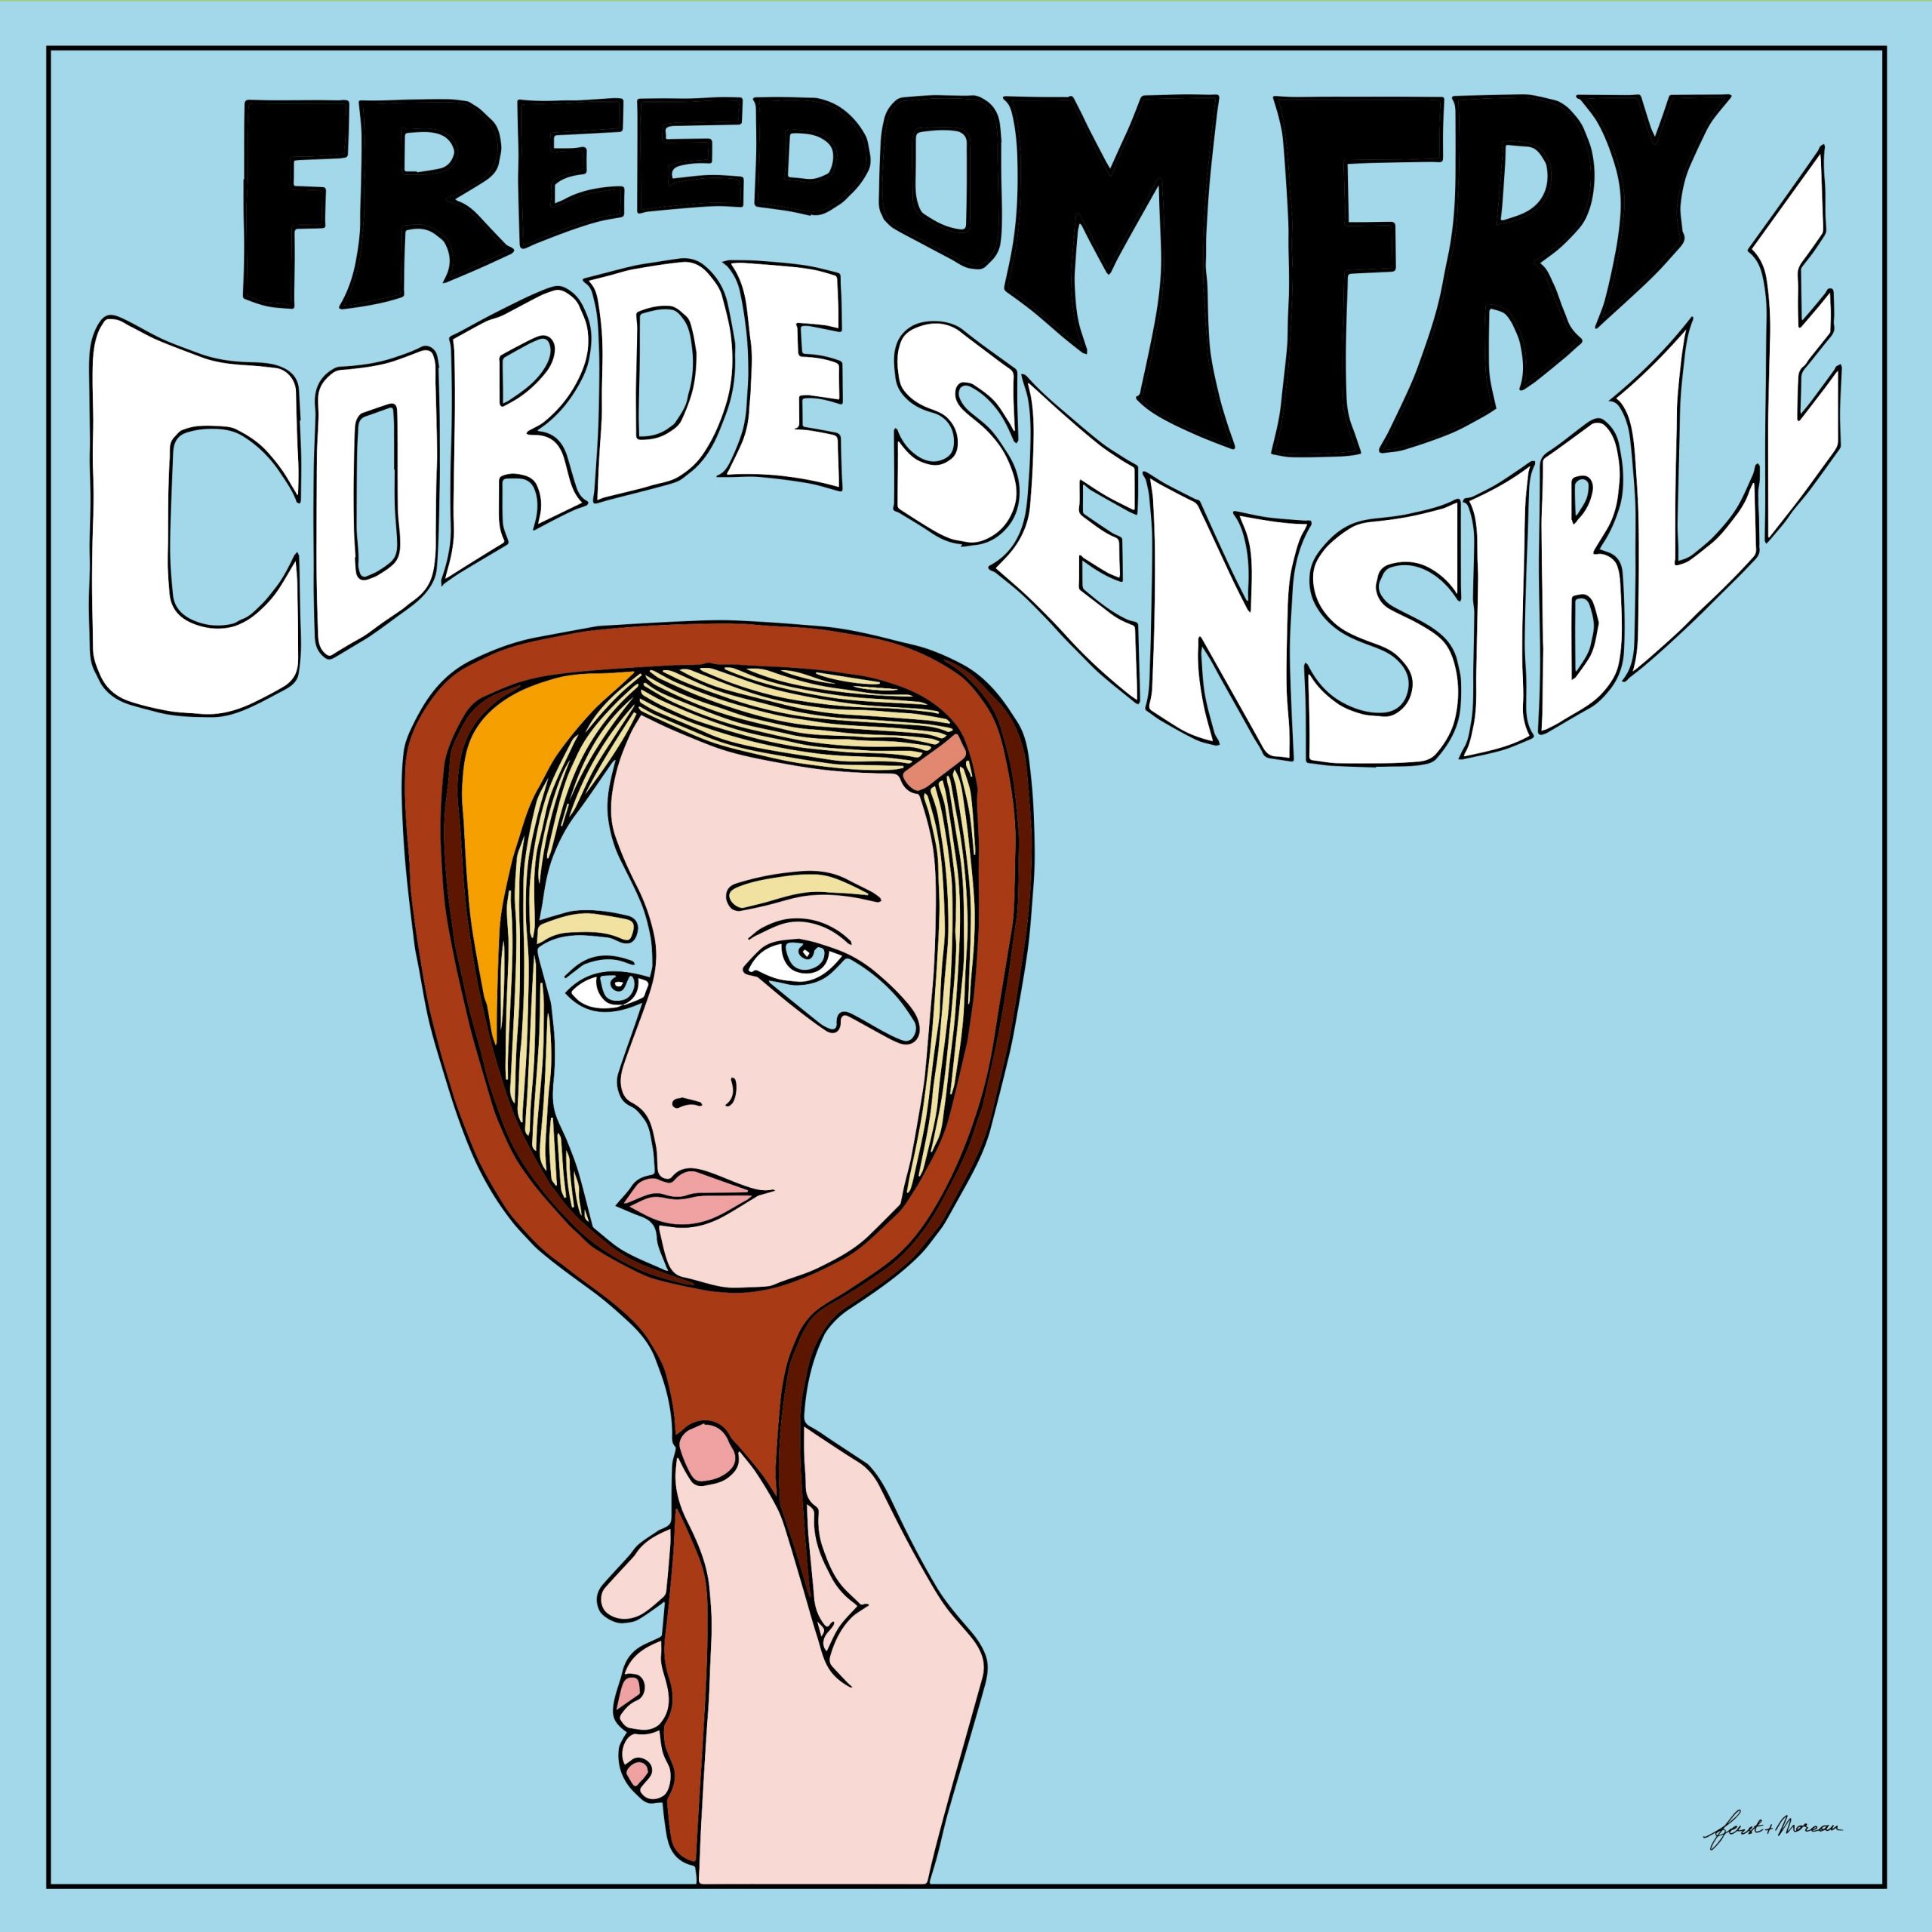 corde sensible - freedom fry - USA - France - indie music - indie folk - new music - music blog - wolf in a suit - wolfinasuit - wolf in a suit blog - wolf in a suit music blog